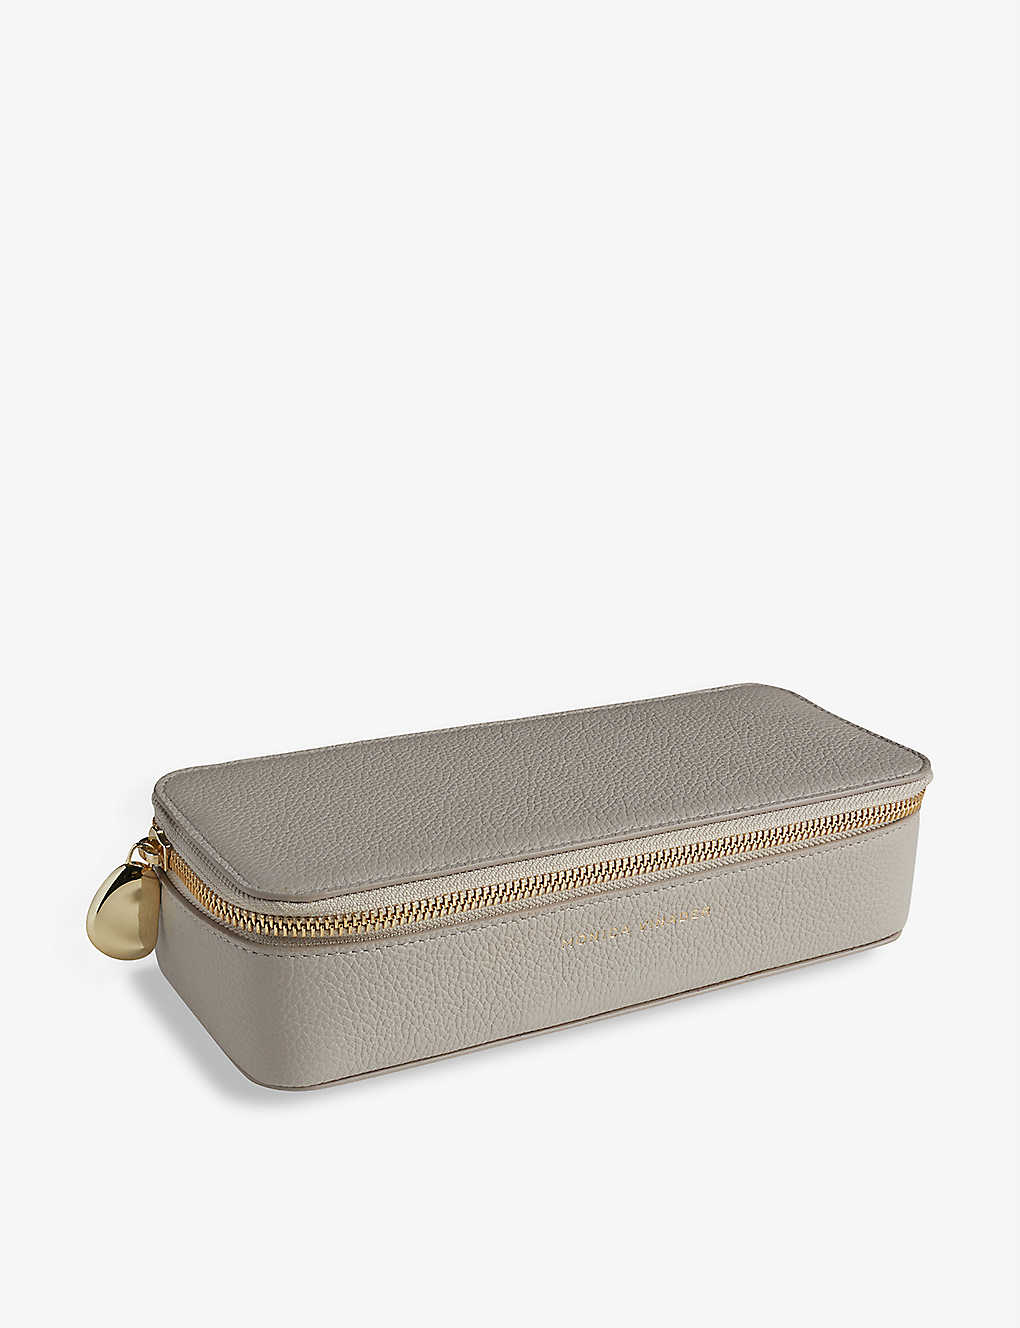 Monica Vinader Zipped Large Leather Trinket Box In Pebble Grey